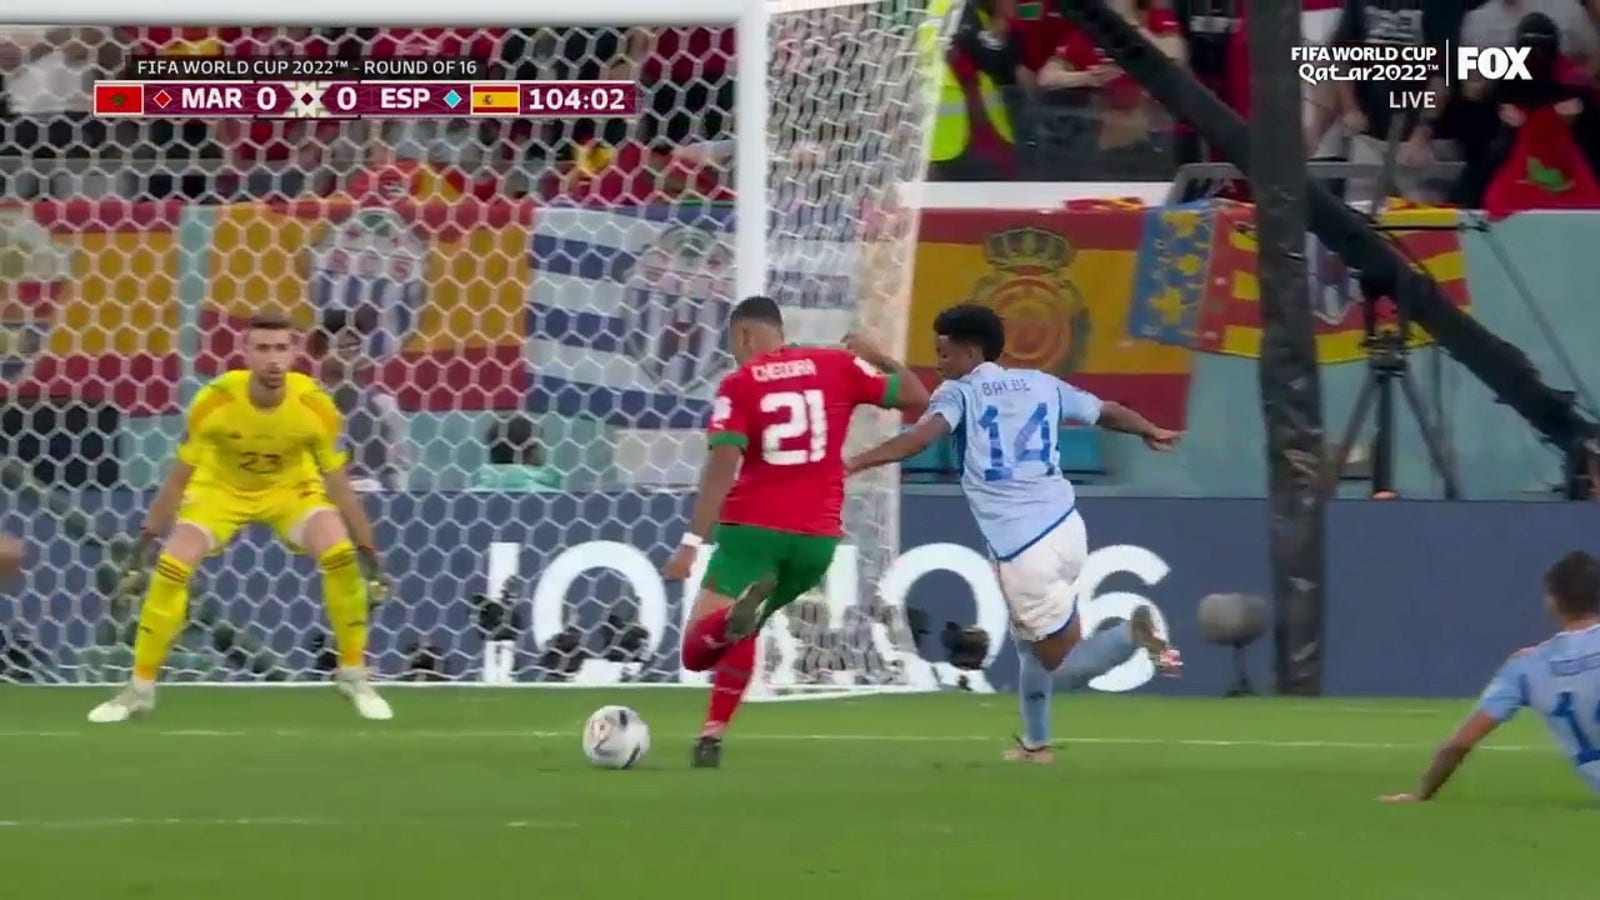 Walid Cheddira's shot for Morocco was saved by Spain goalkeeper Unai Simon